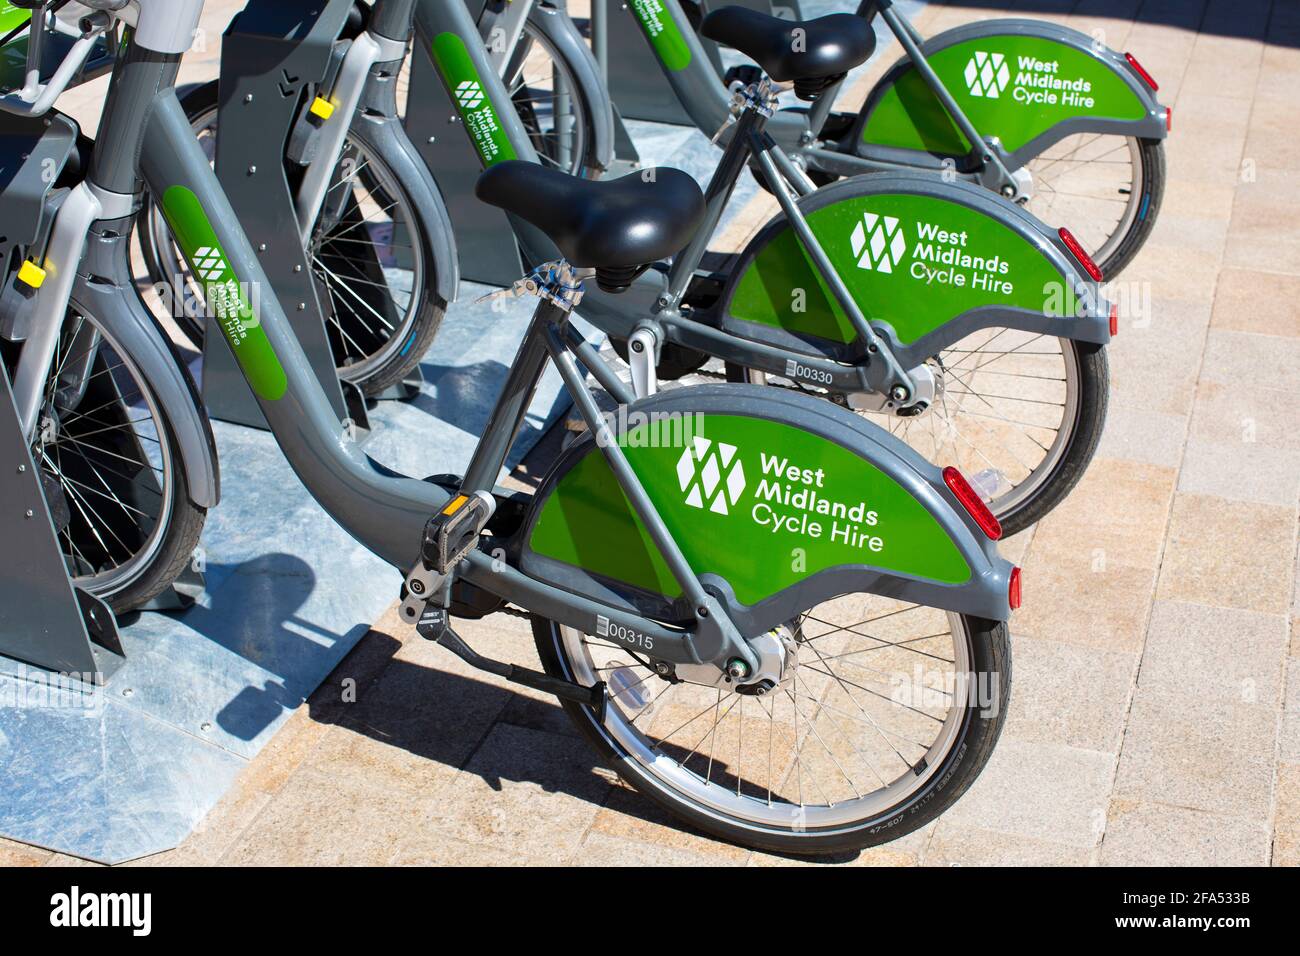 West Midlands Cycle Hire bikes Stock Photo